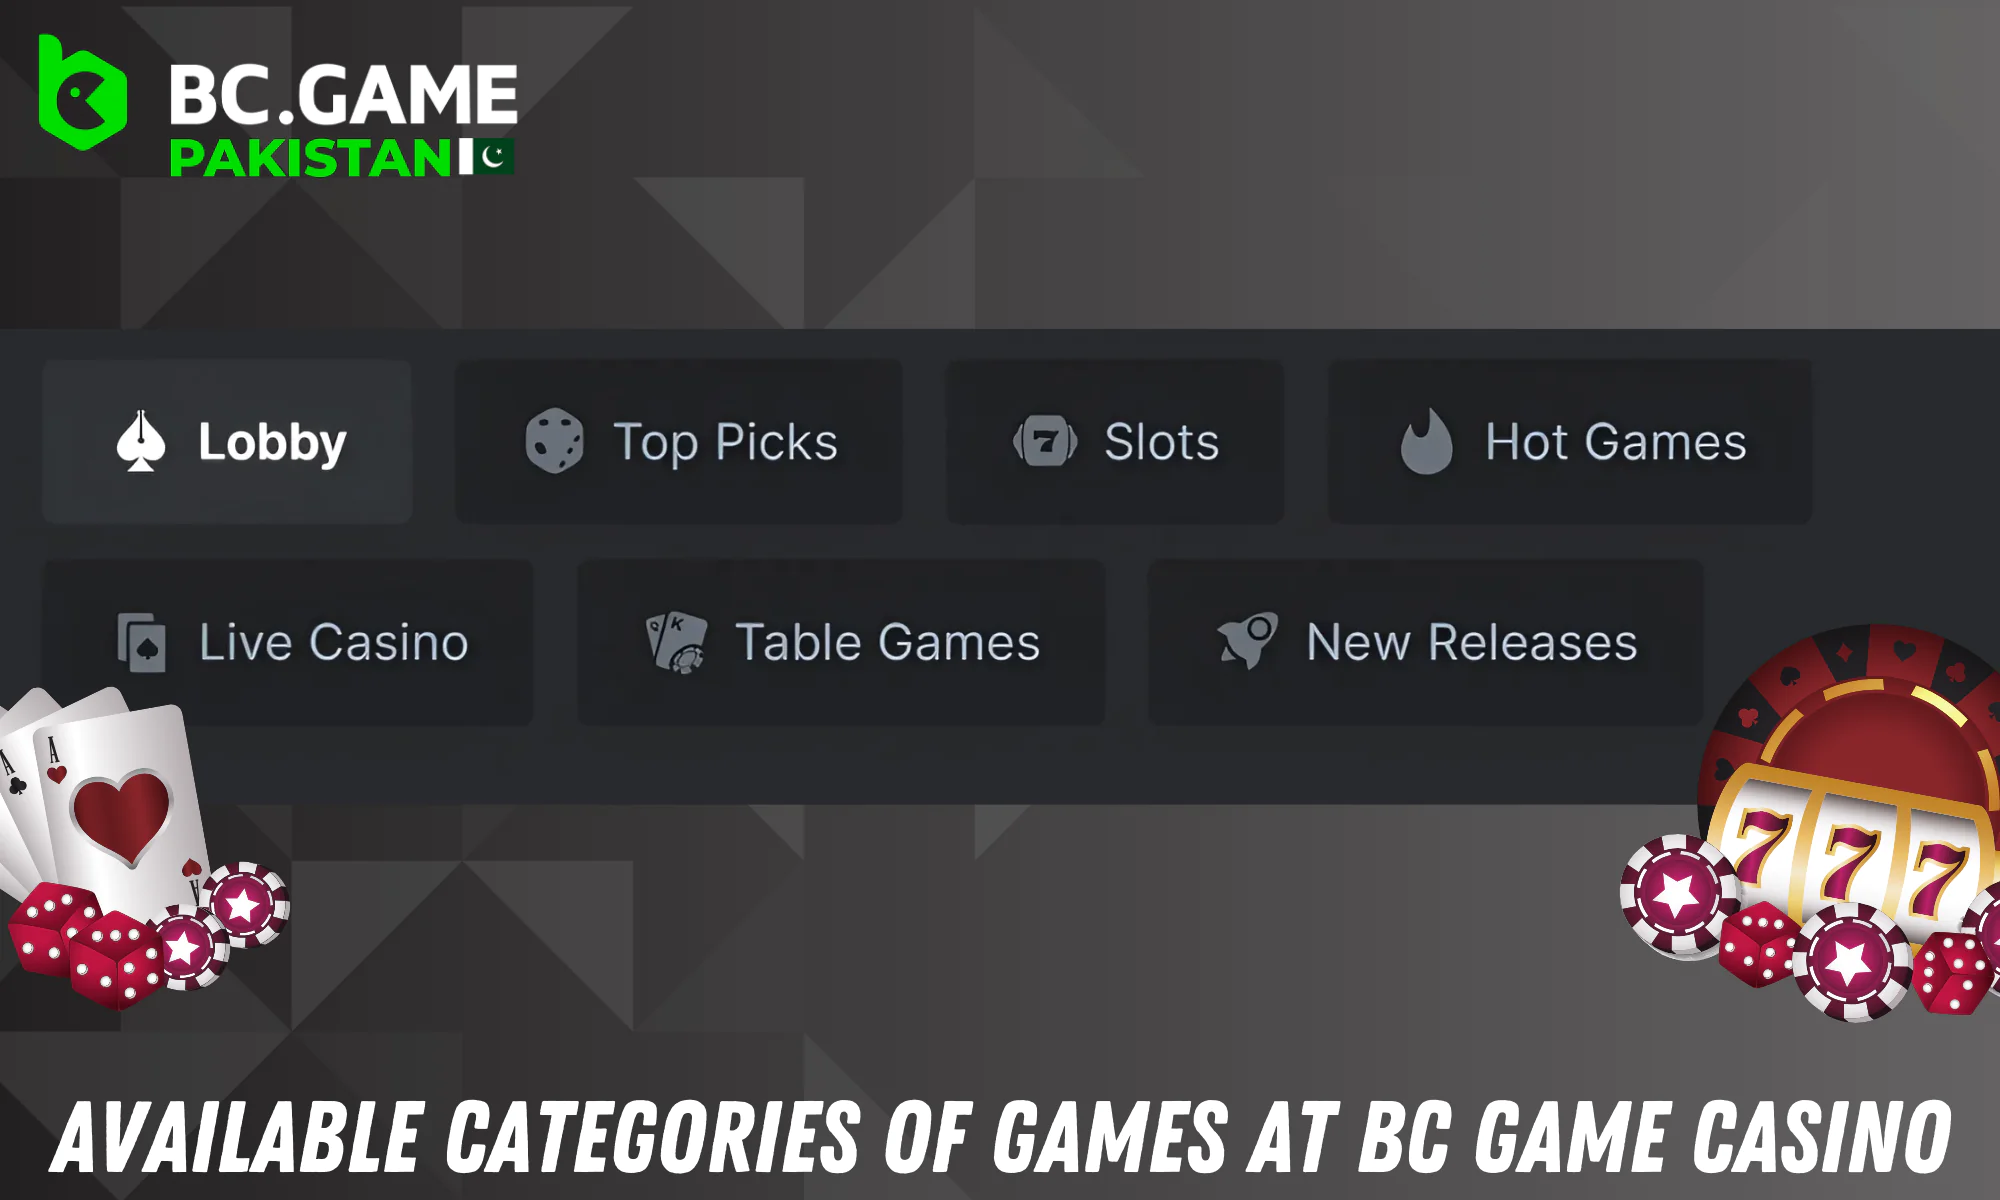 BC Game online casino in Pakistan offers many game categories